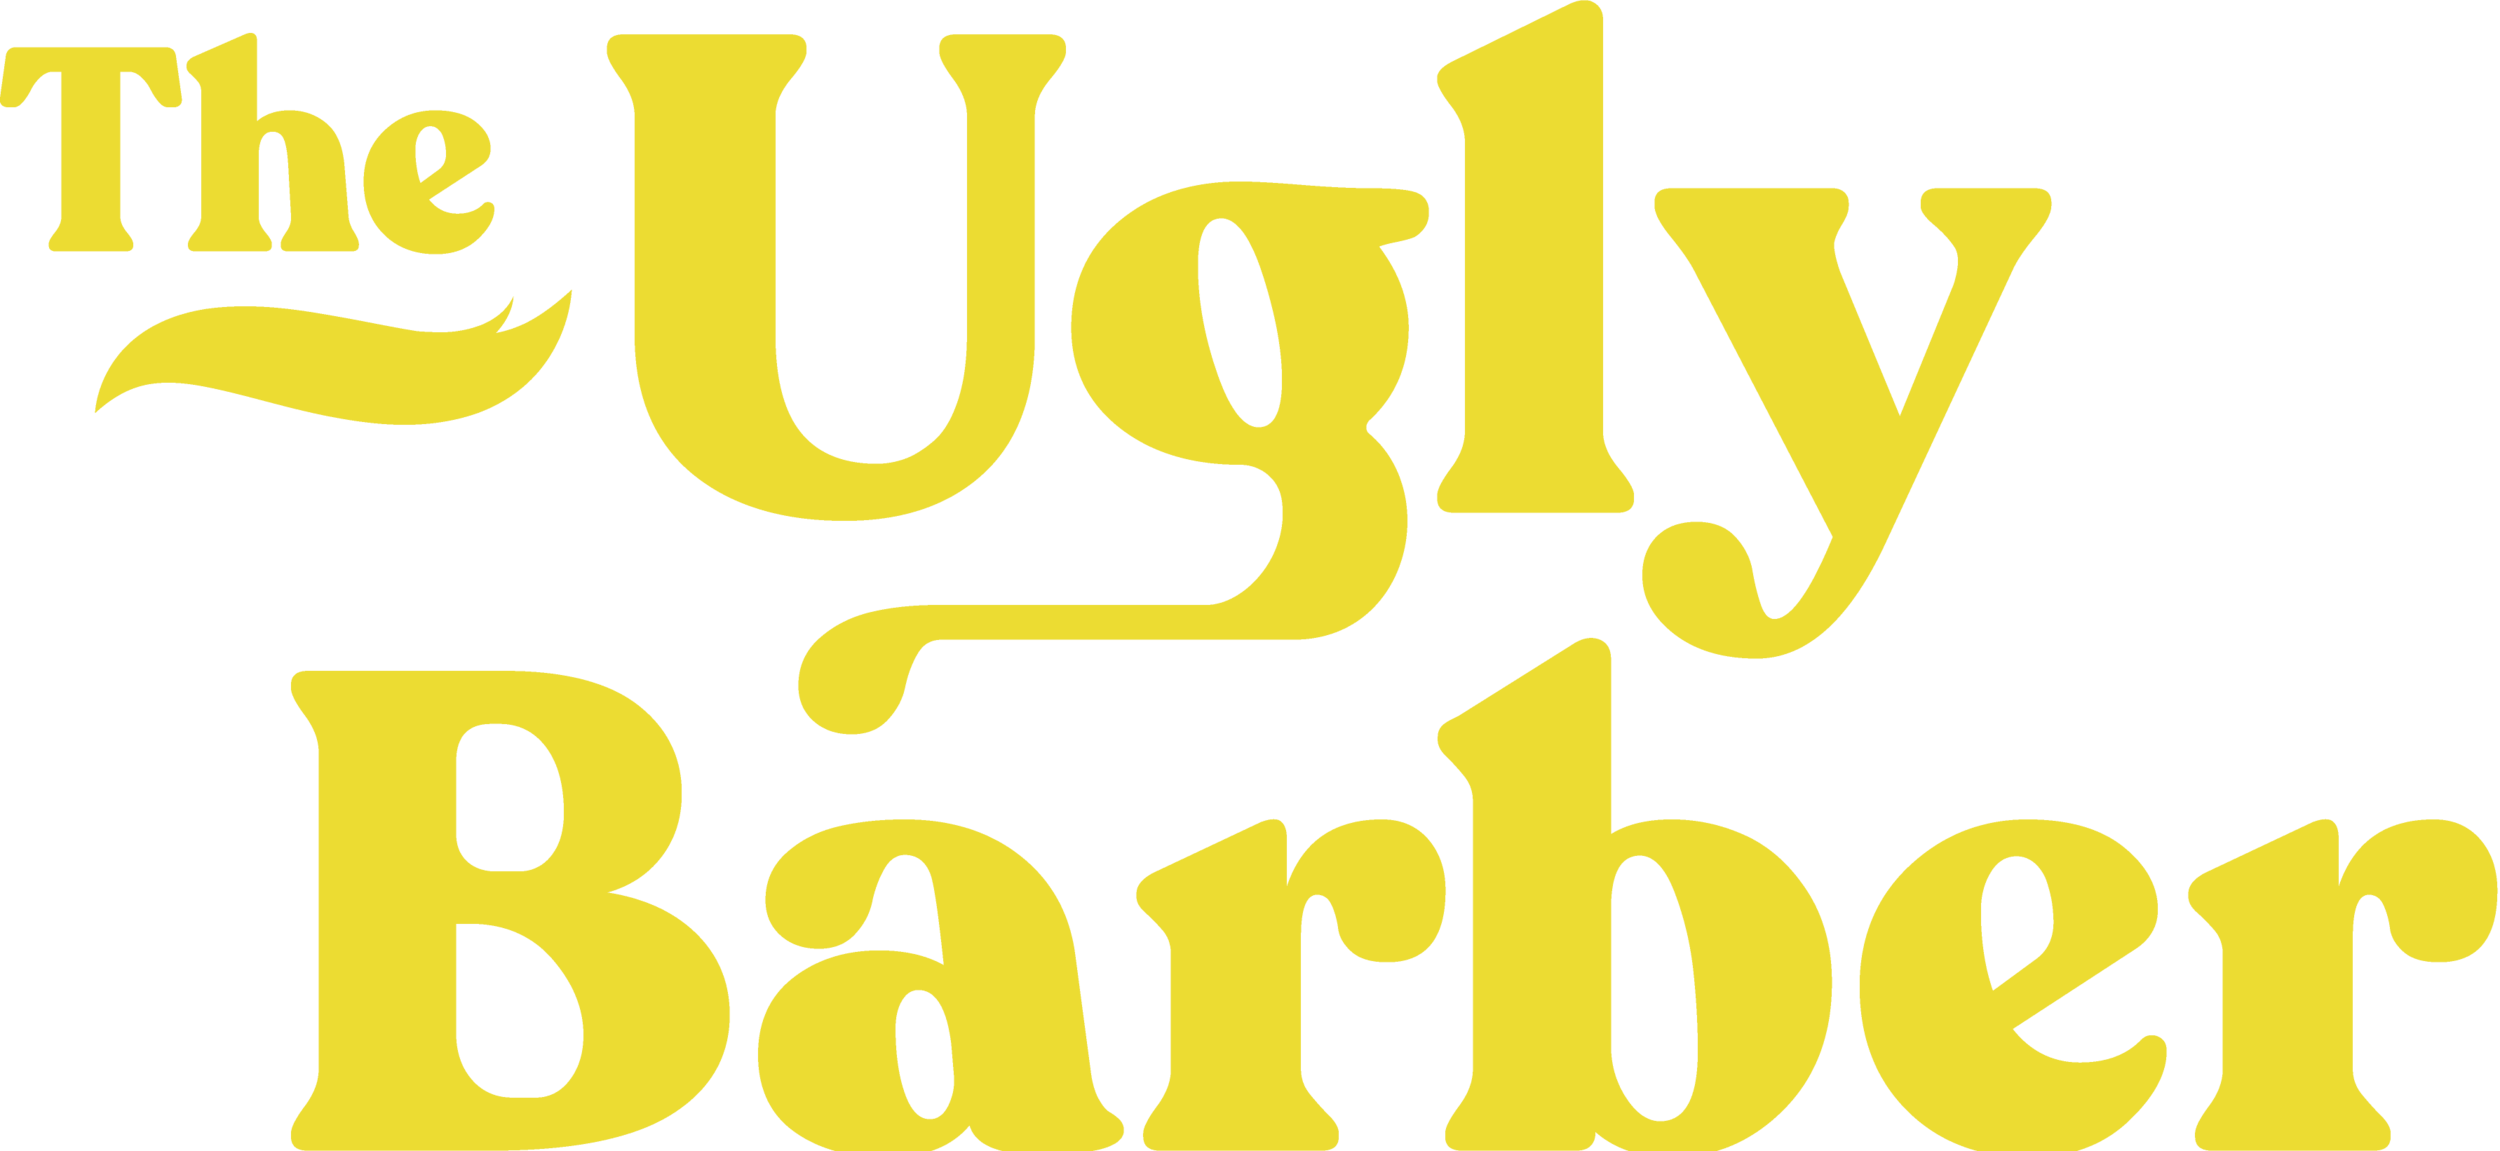 The Ugly Barber